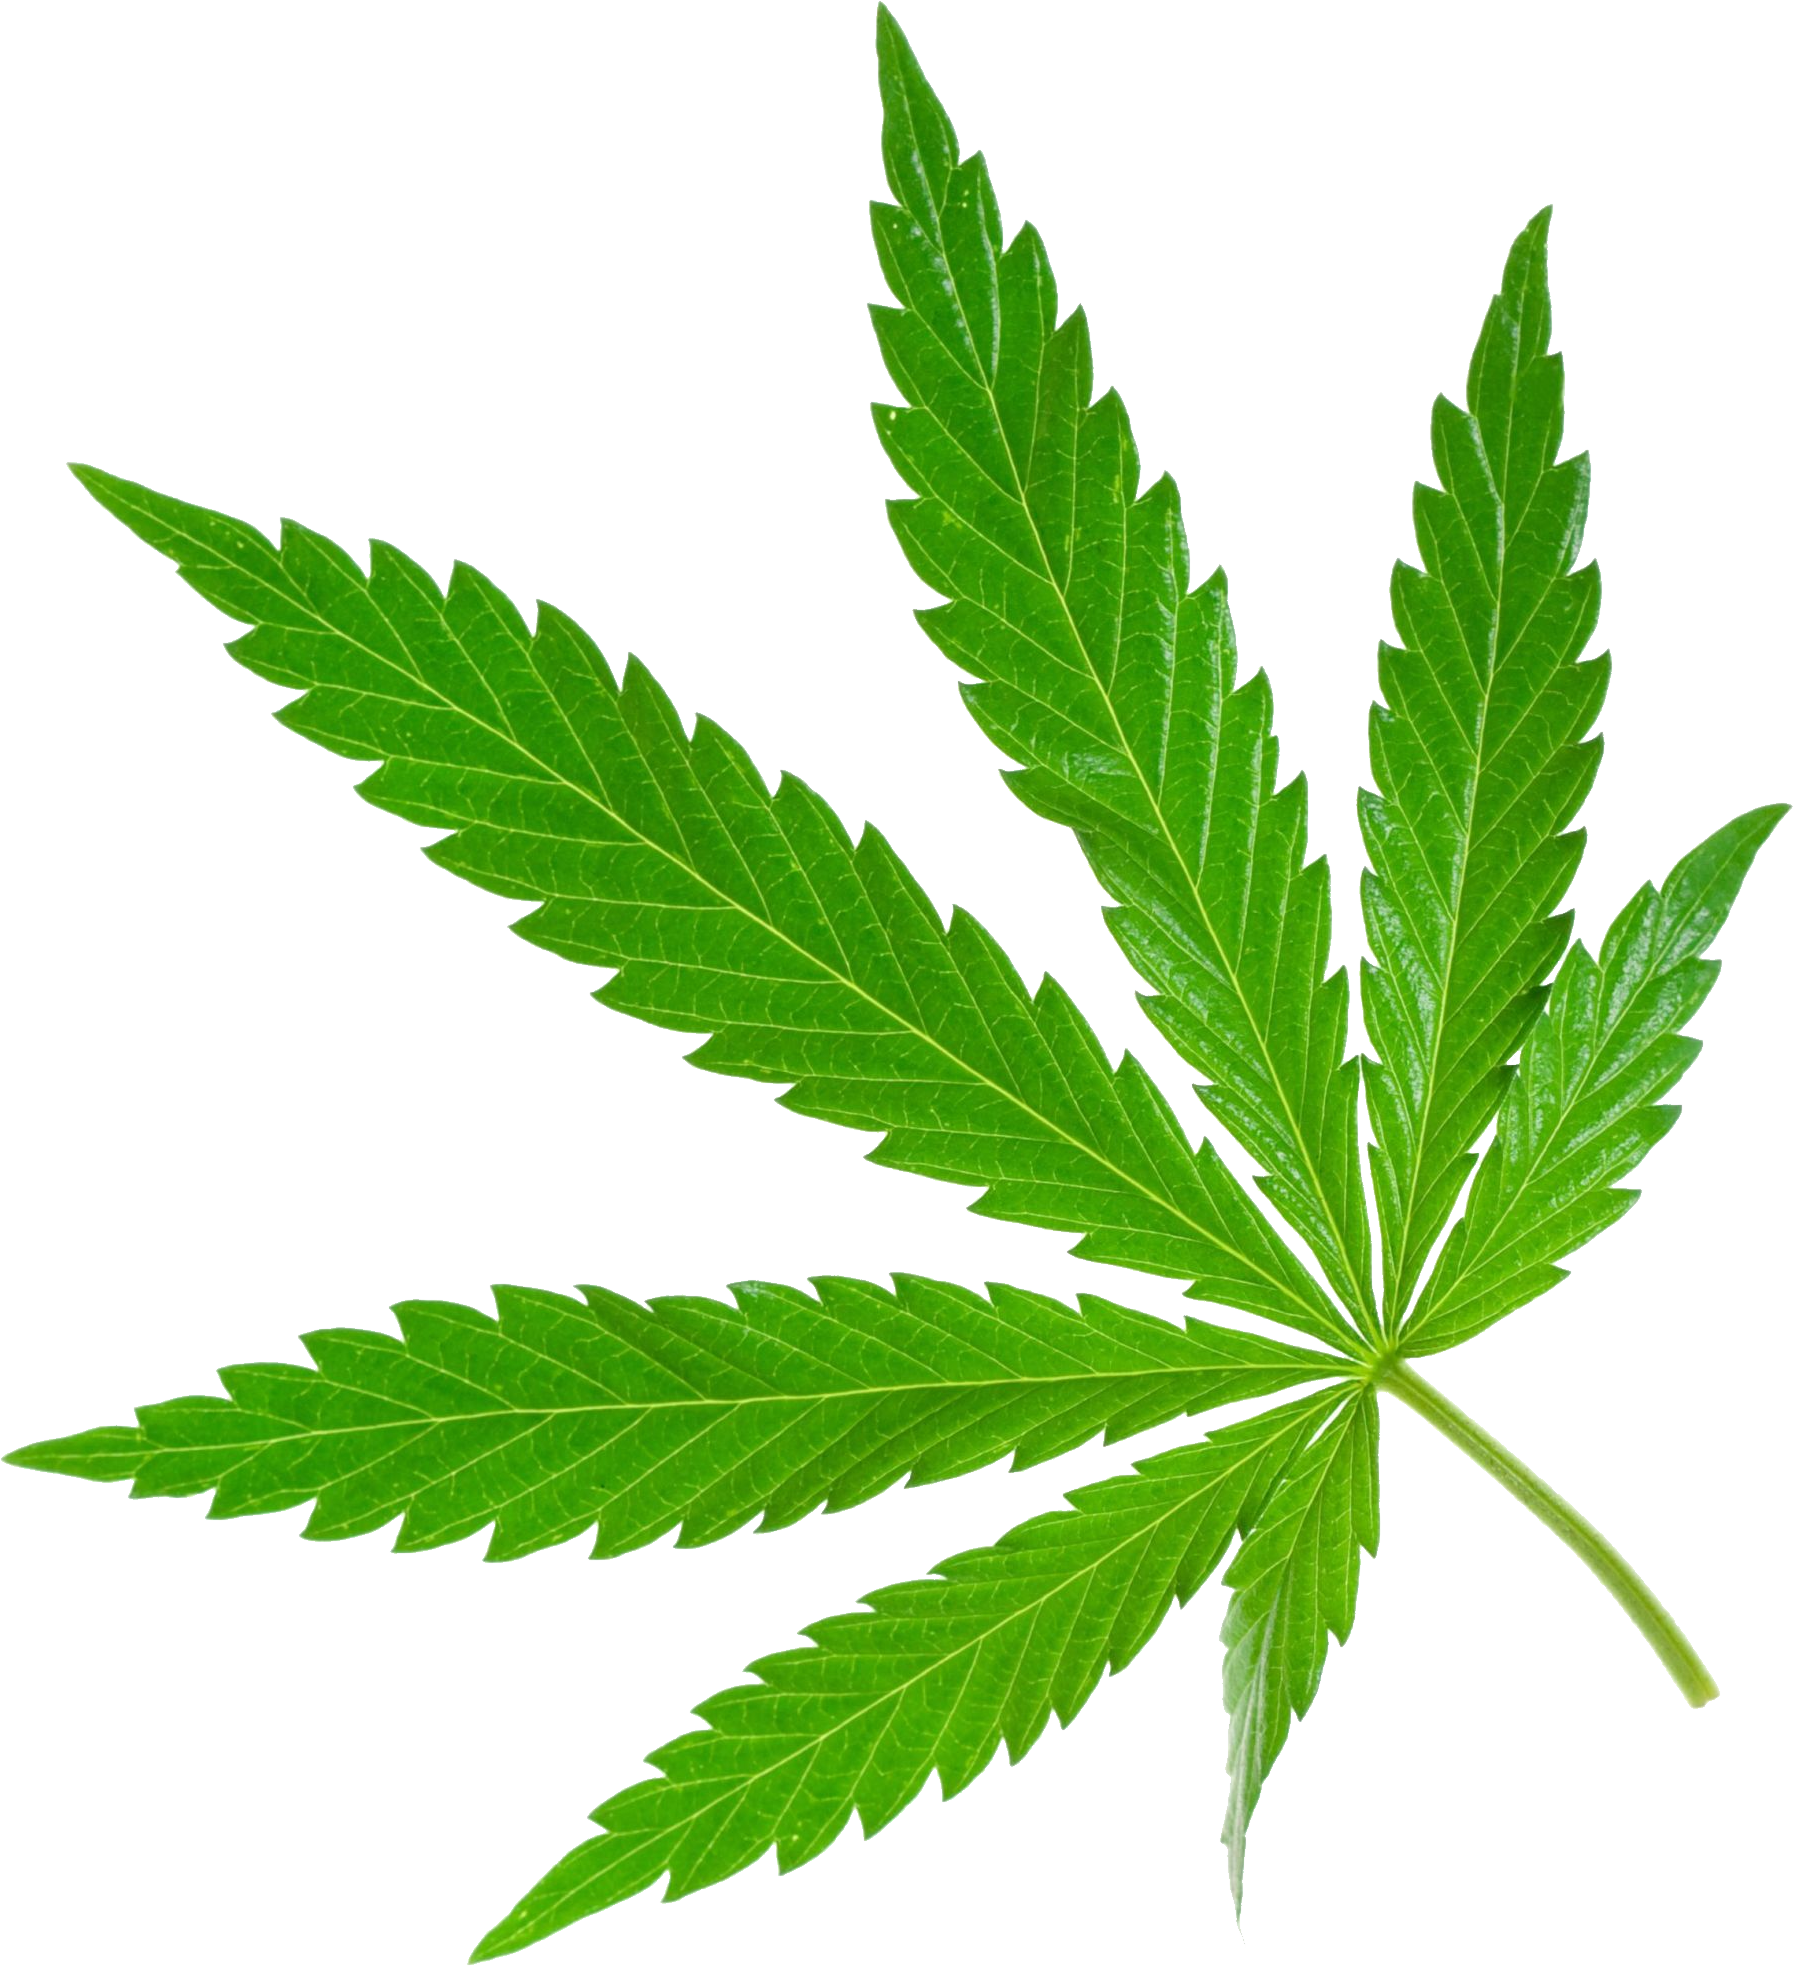 Weed png image purepng. Drugs clipart hemp